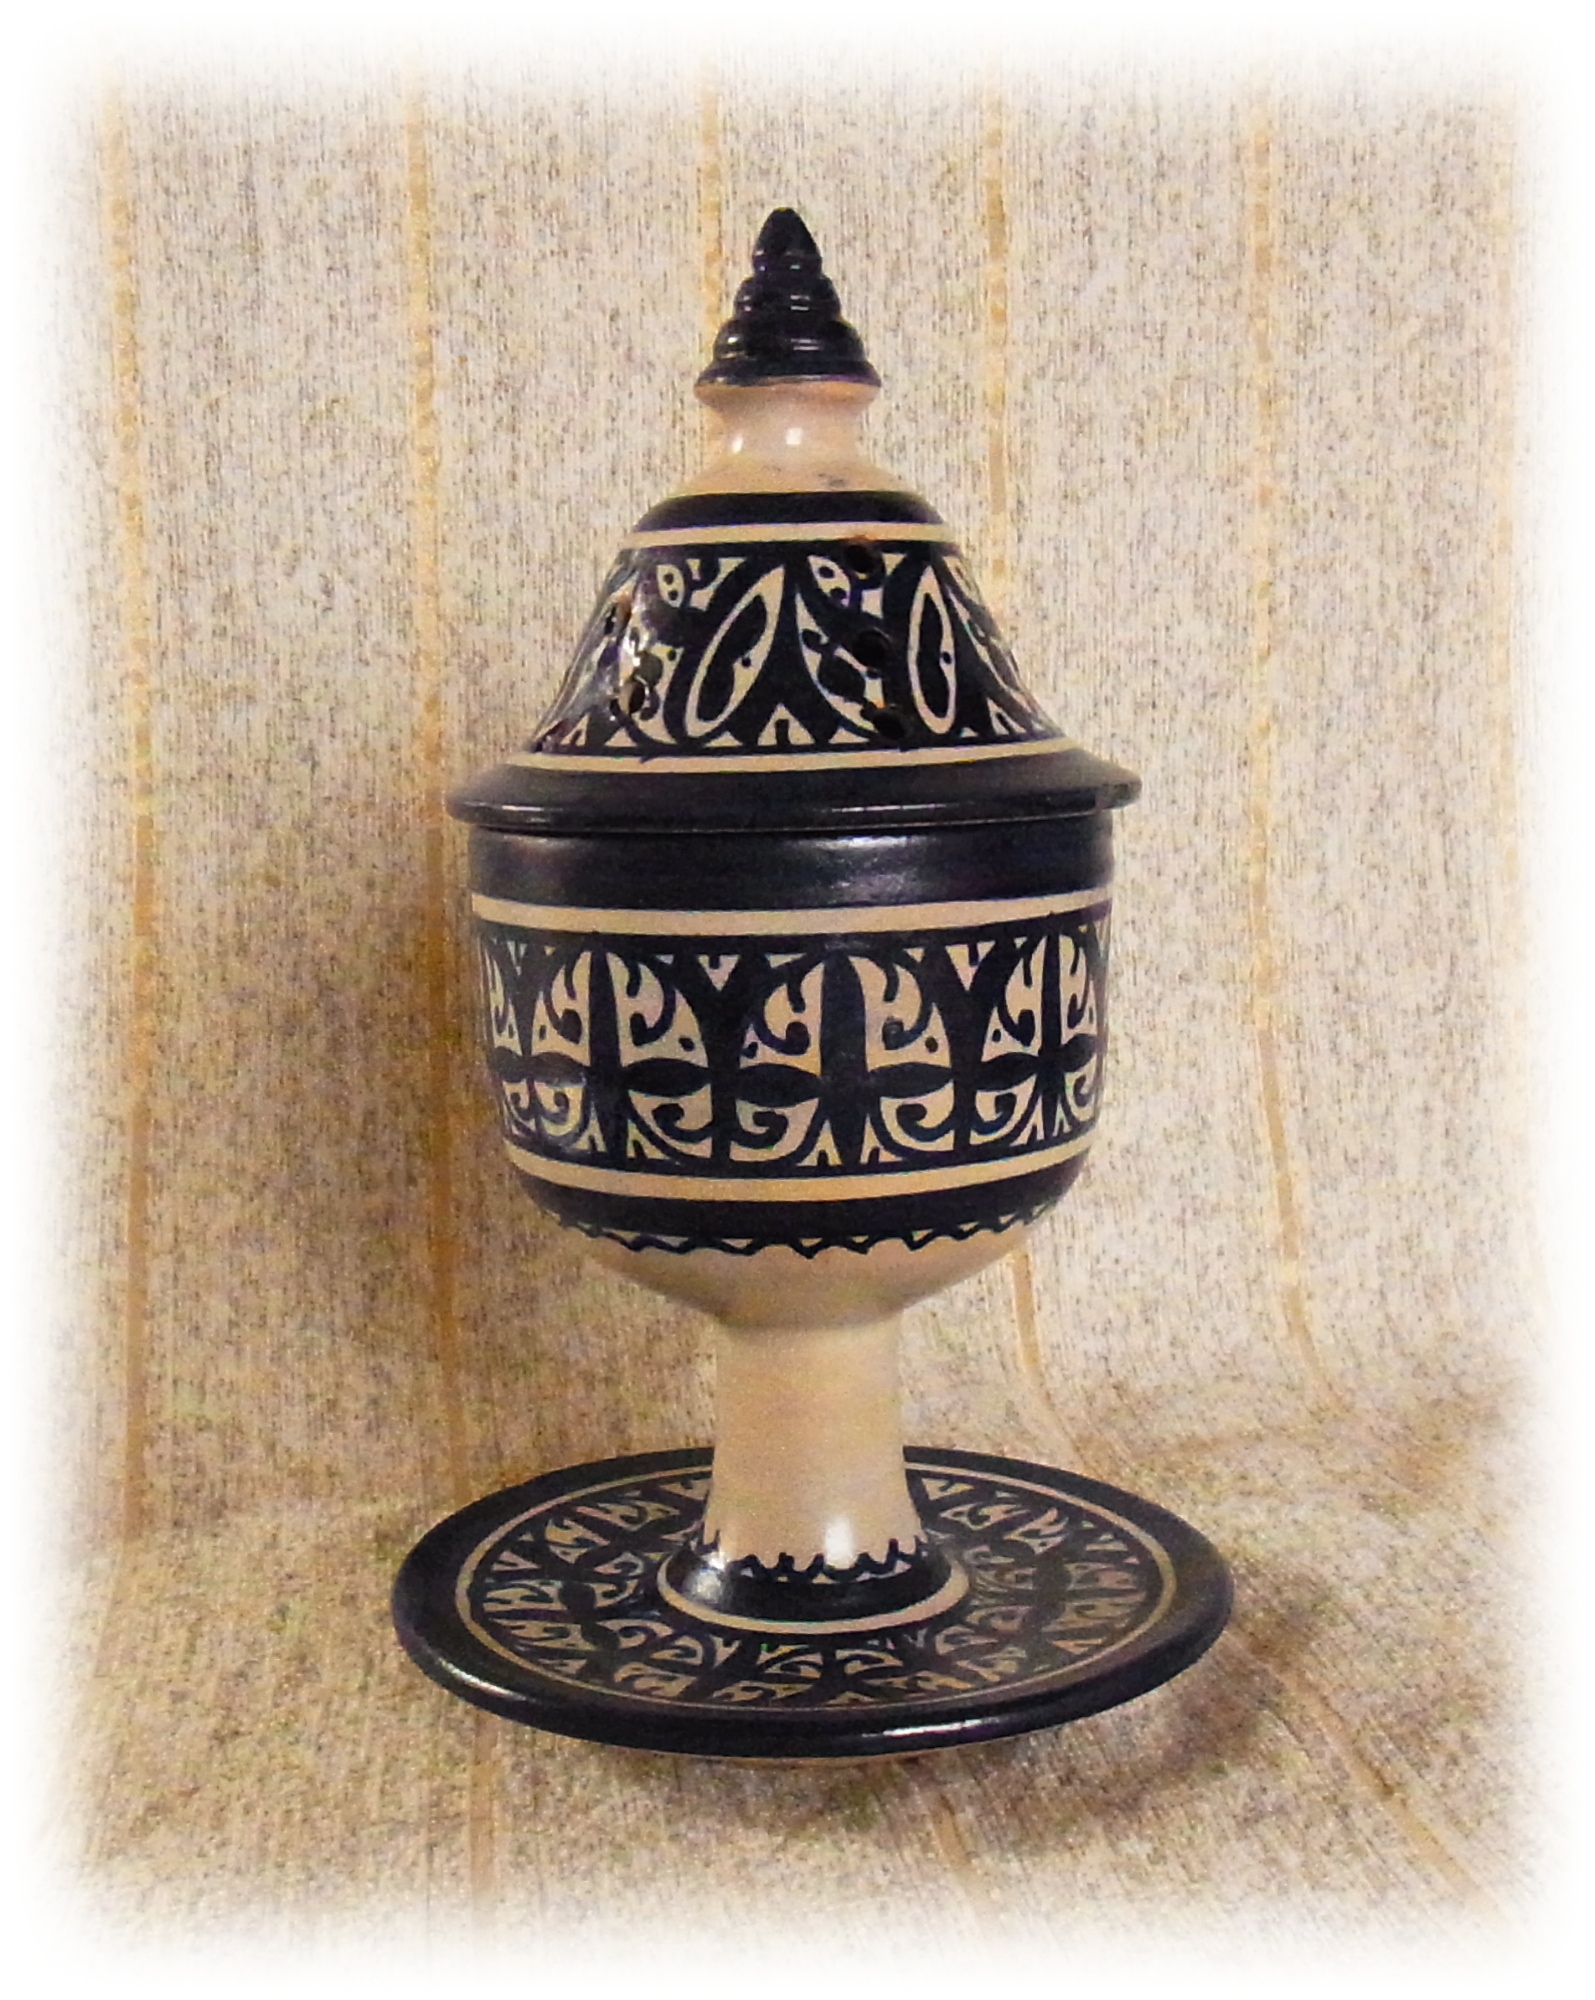 Ceramic Frankincense burner made in the old town of Fes